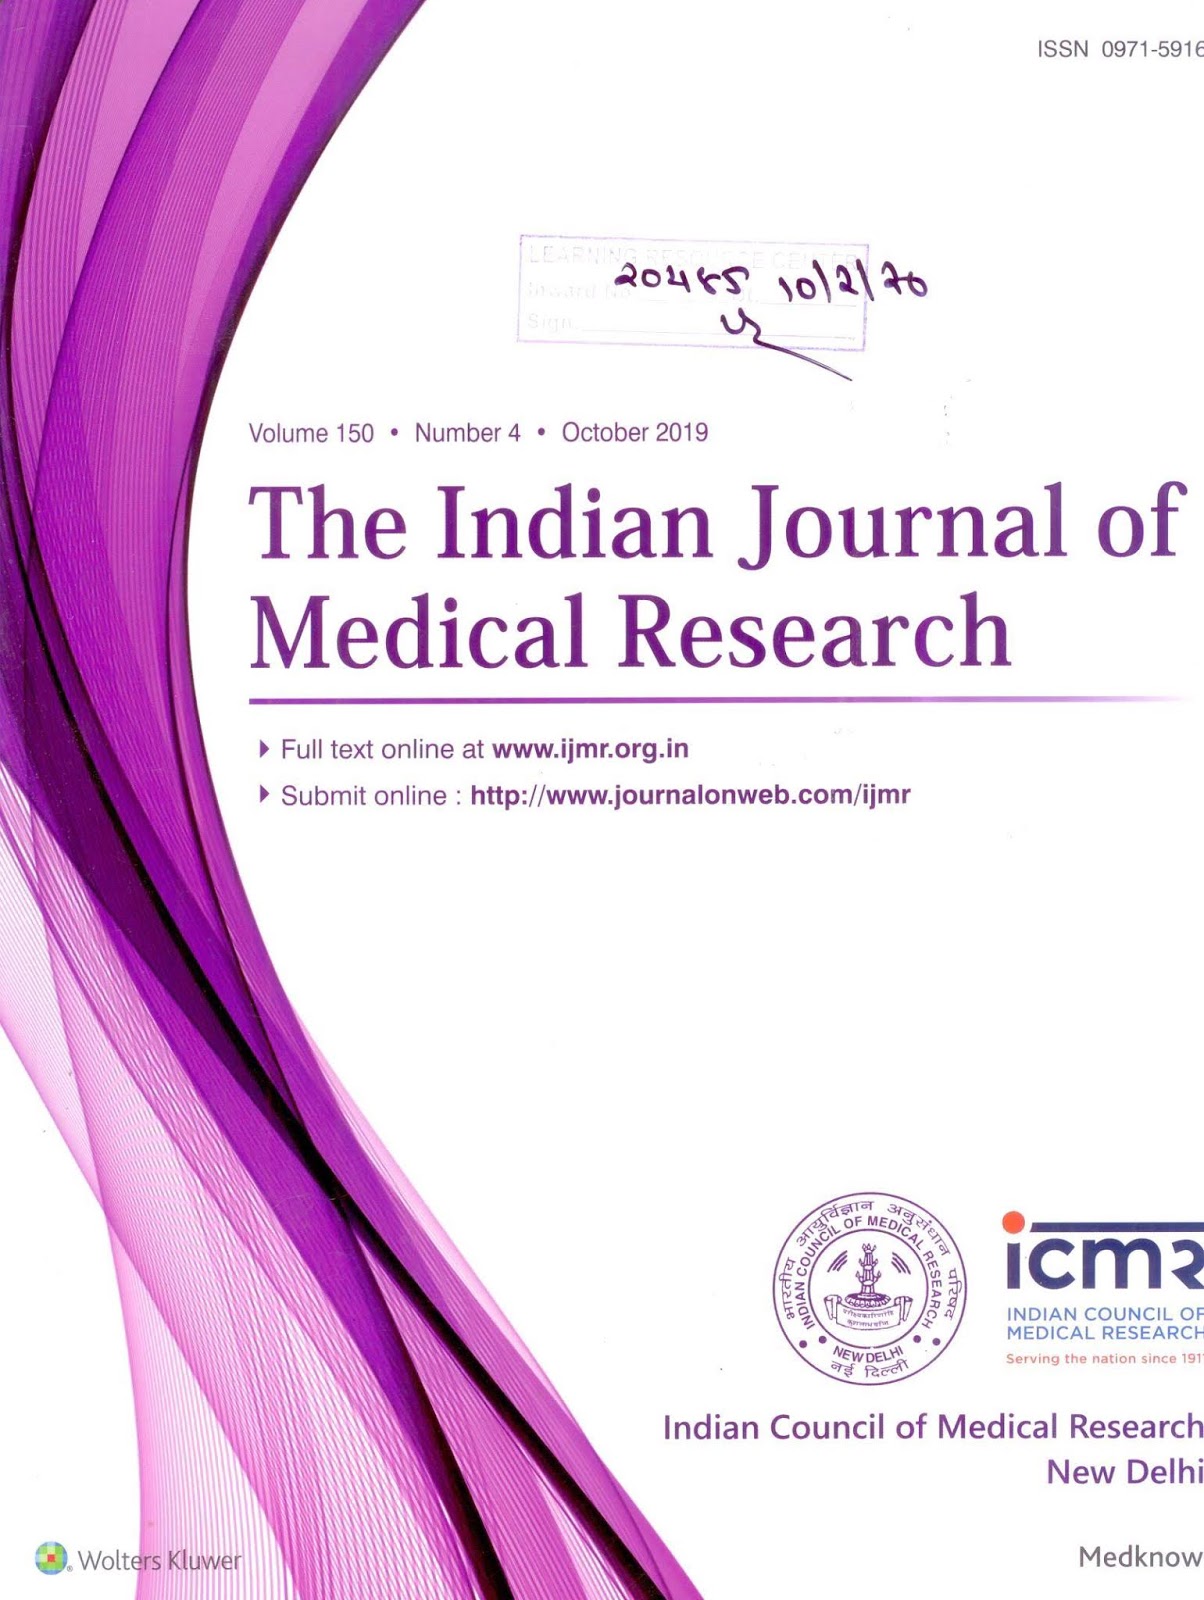 www.ijmr.org.in/showBackIssue.asp?issn=0971-5916;yeara=2019;volume=150;issue=4;month=October